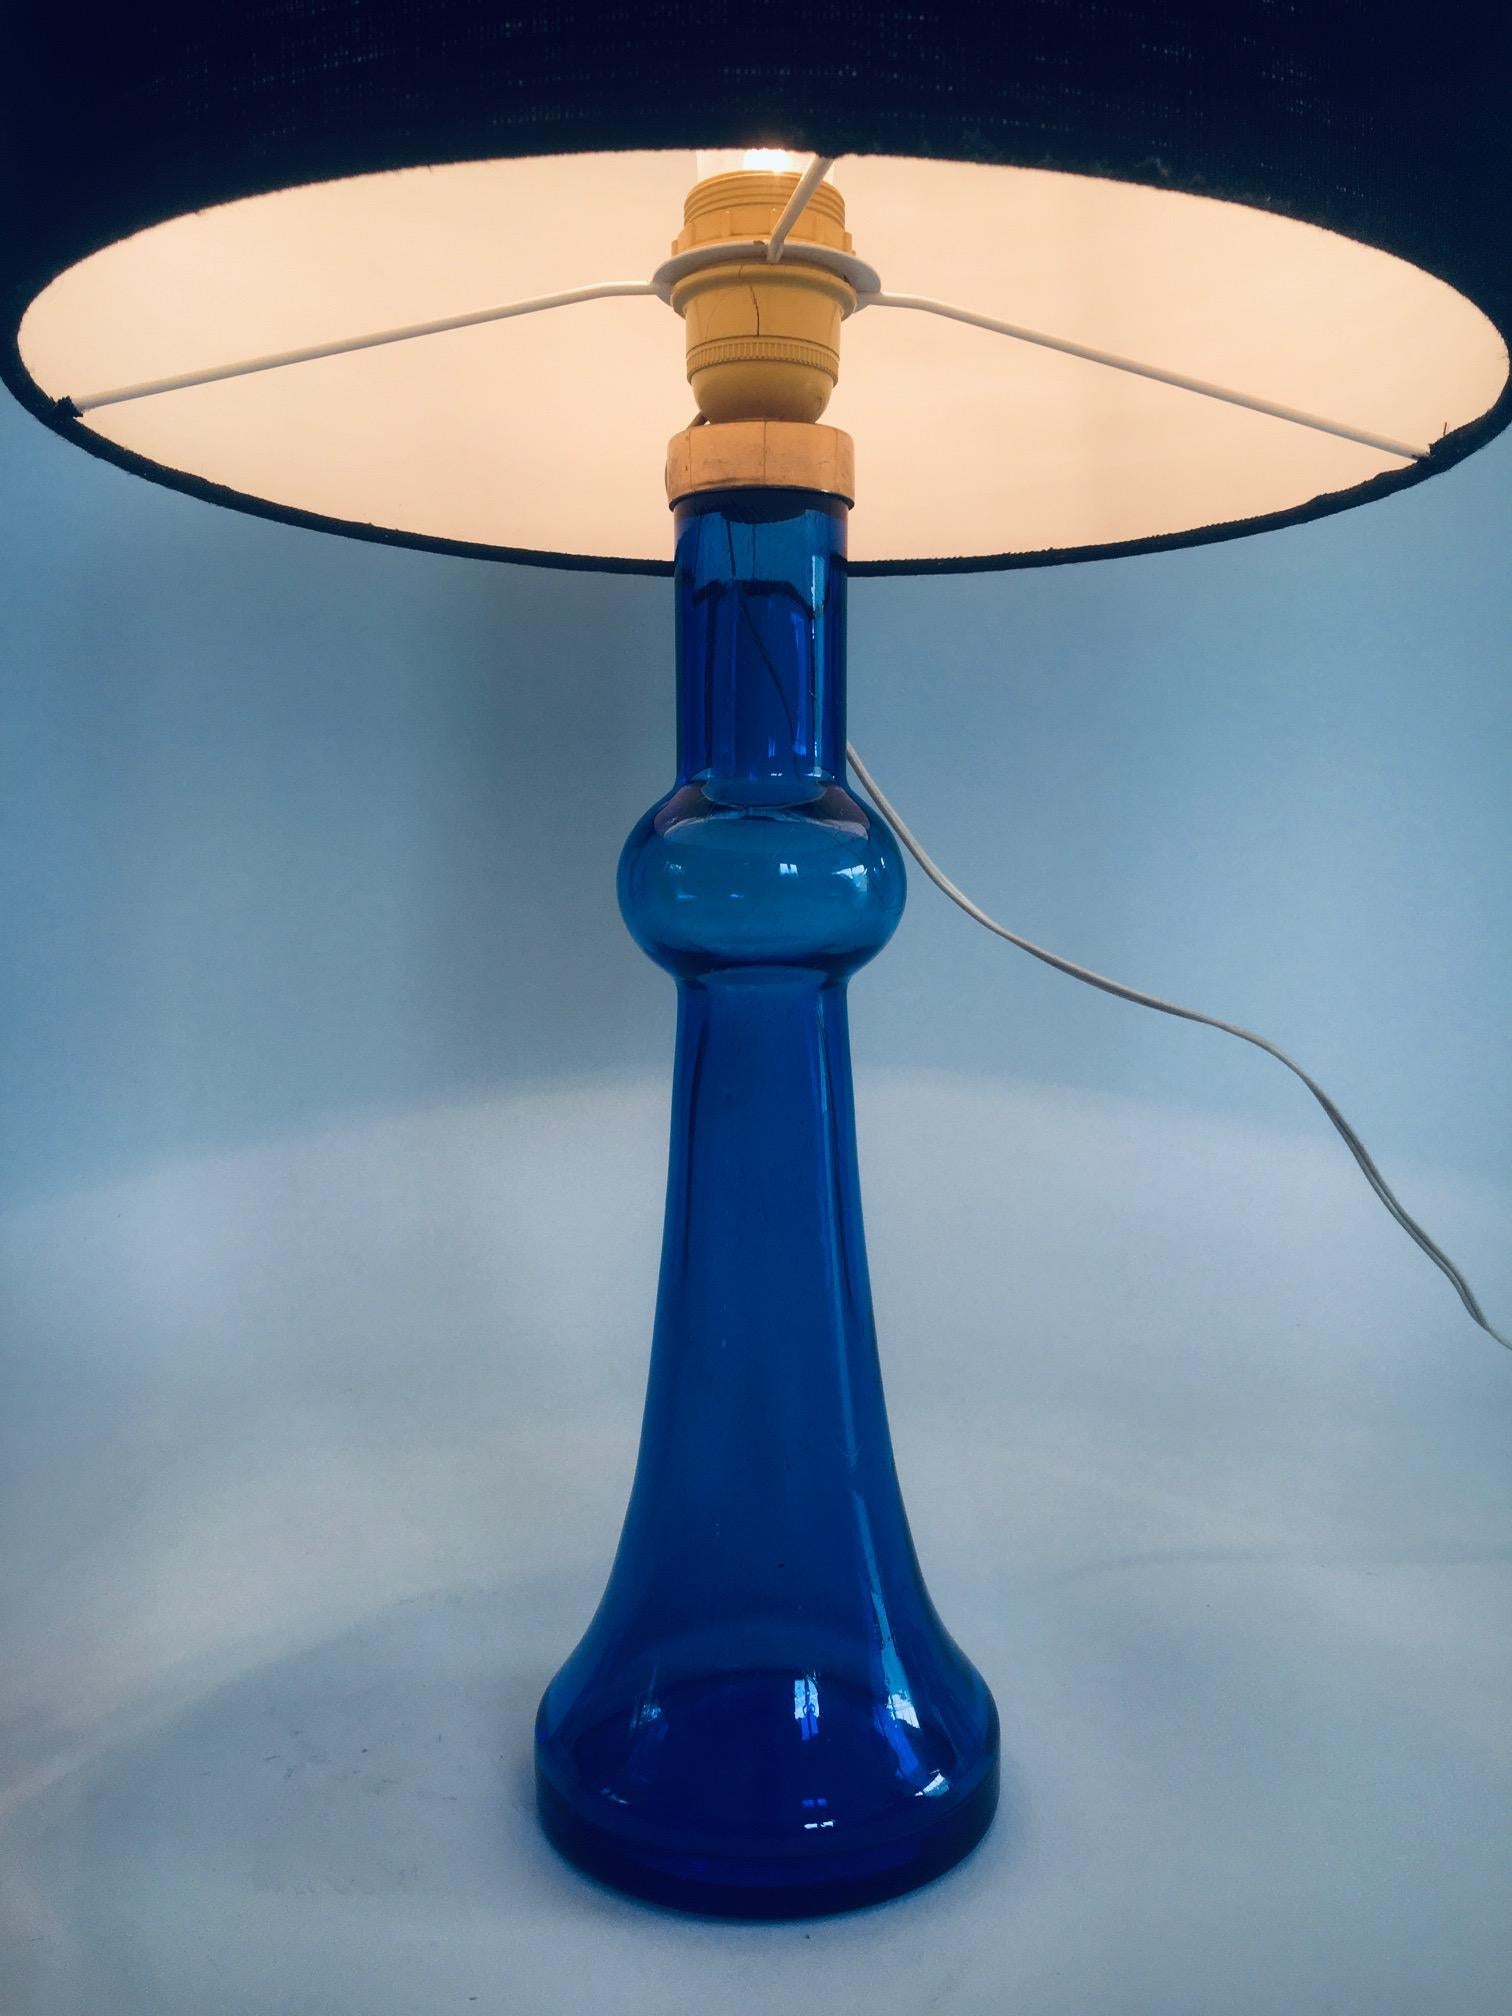 Midcentury Design Blue Glass Table Lamp by Nanny Still for Raak, 1960's For Sale 6